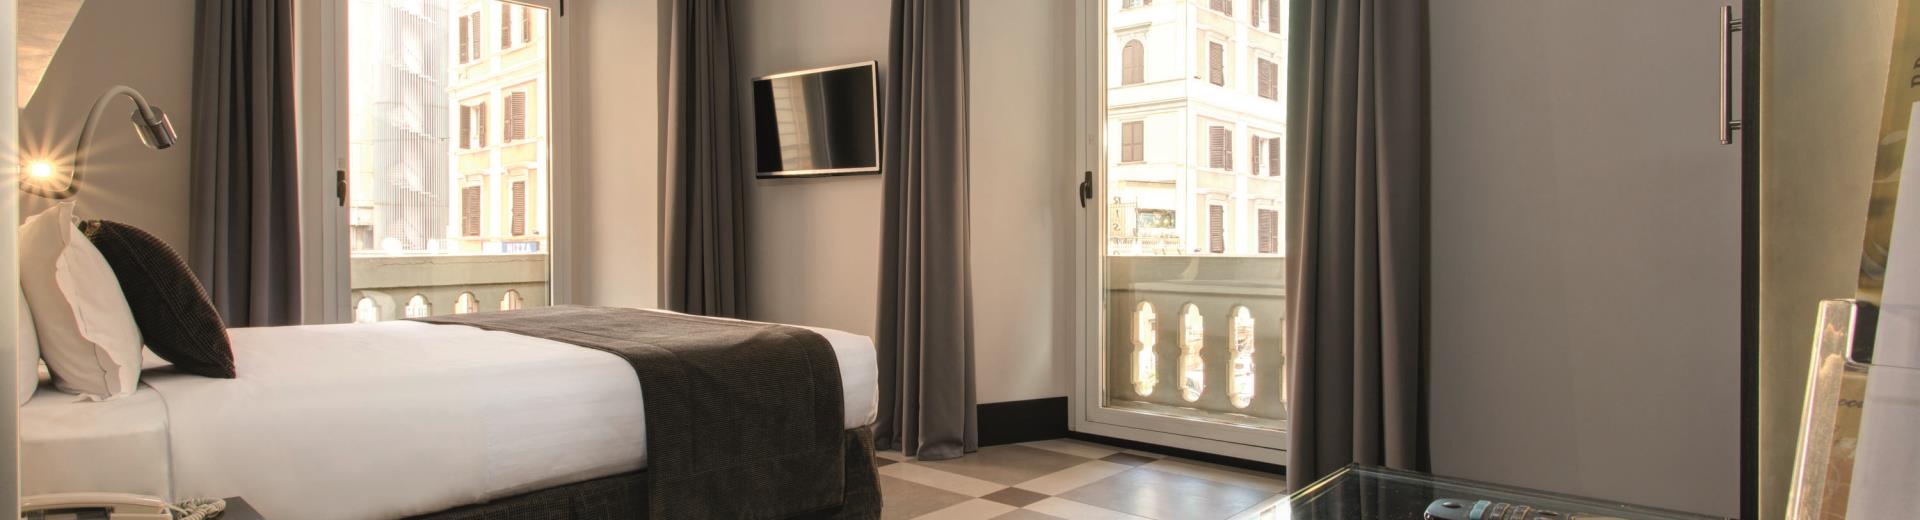 Room Day Use in Rome - BW Plus Hotel Universo